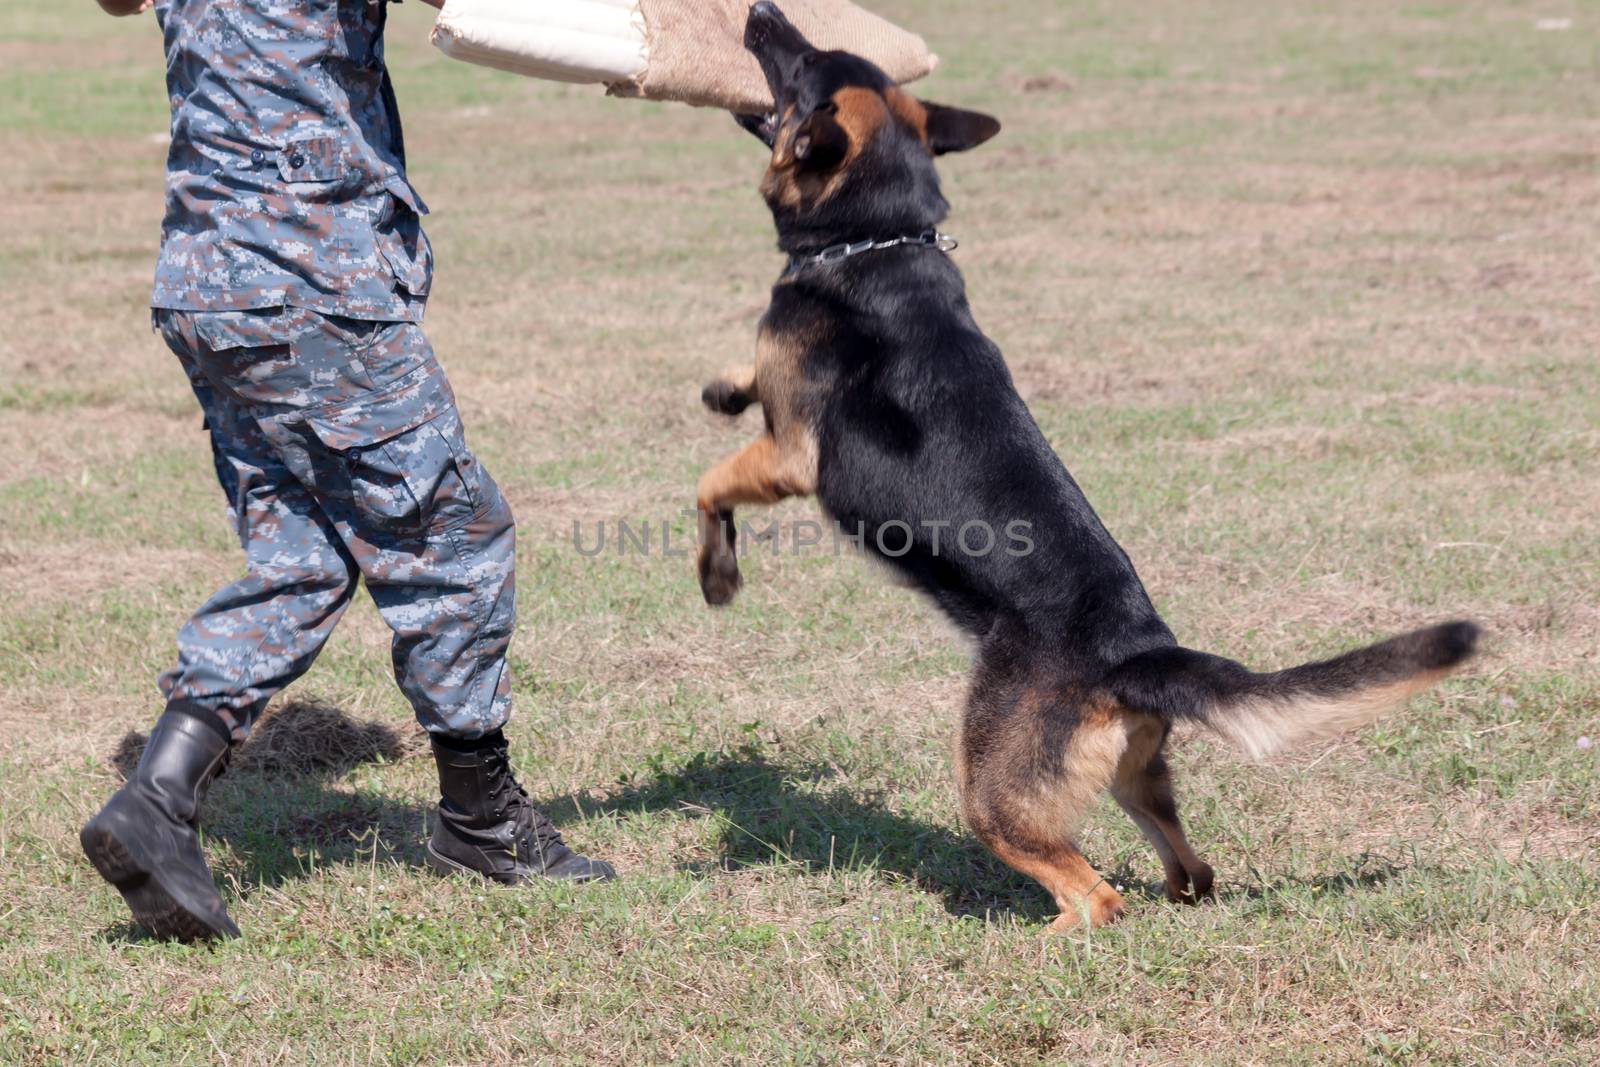 Soldiers from the K-9 dog unit works with his partner to apprehend a bad guy during a demonstration